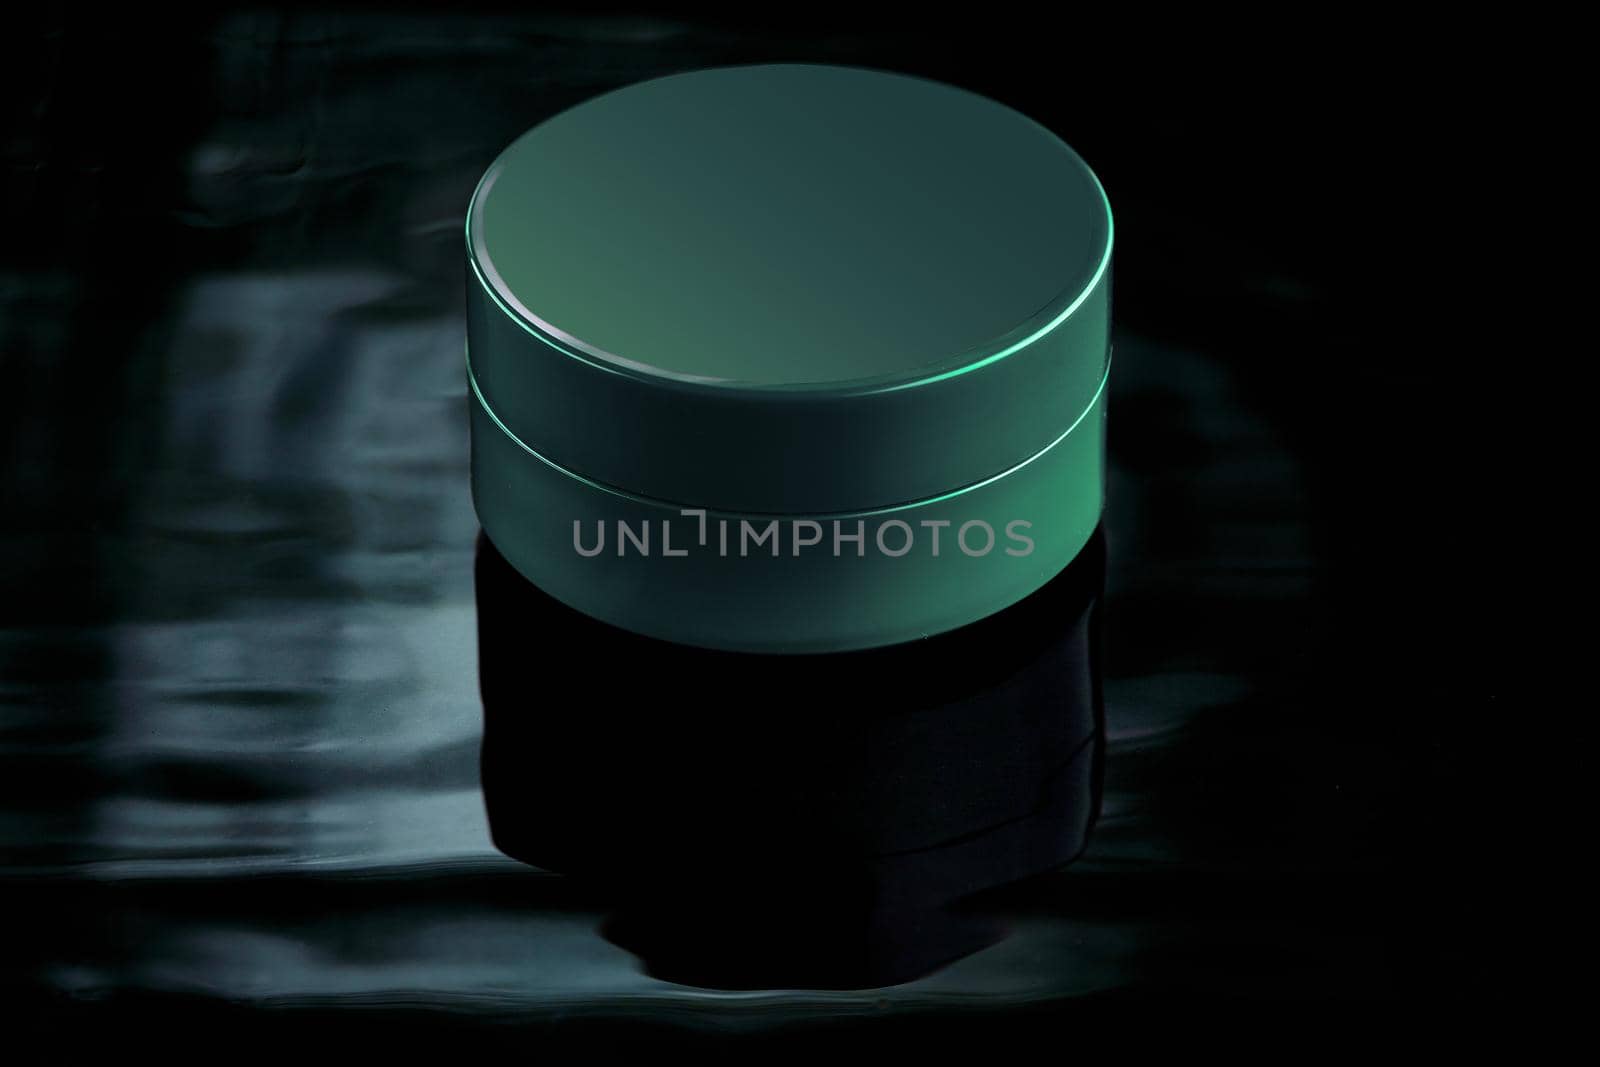 Mockup for advertising cream, lation, moisturizing milk or body and face care products. Small jar of emerald color by SergeyPakulin